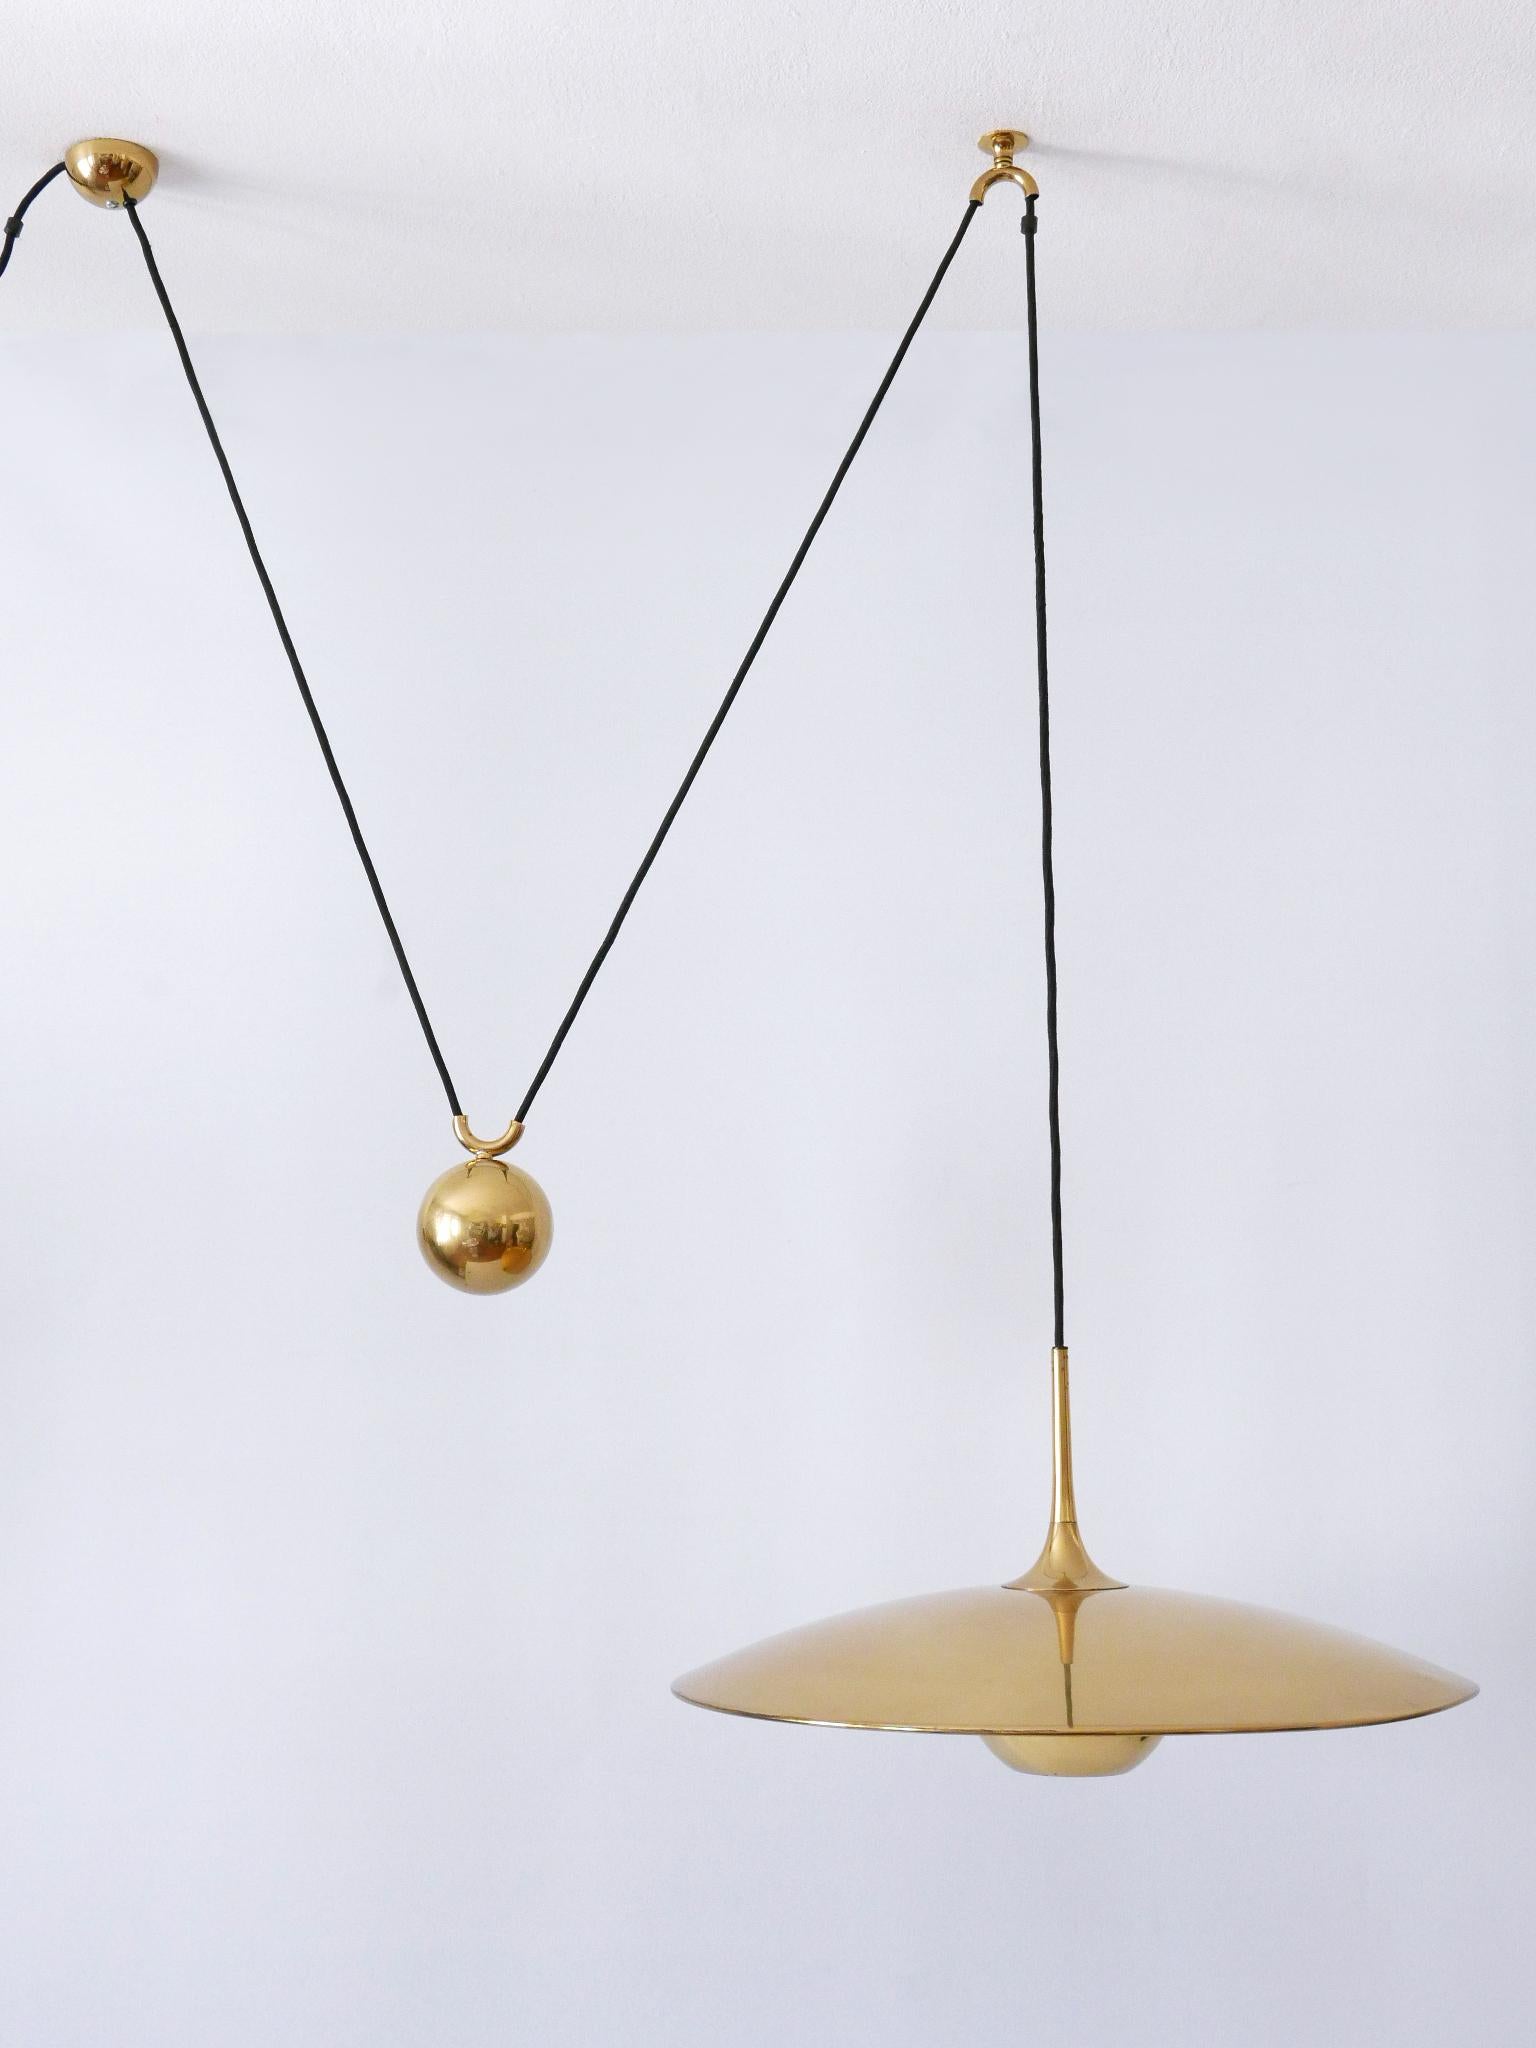 Late 20th Century Elegant Counterweight Brass Pendant Lamp 'Onos 55' by Florian Schulz 1970s